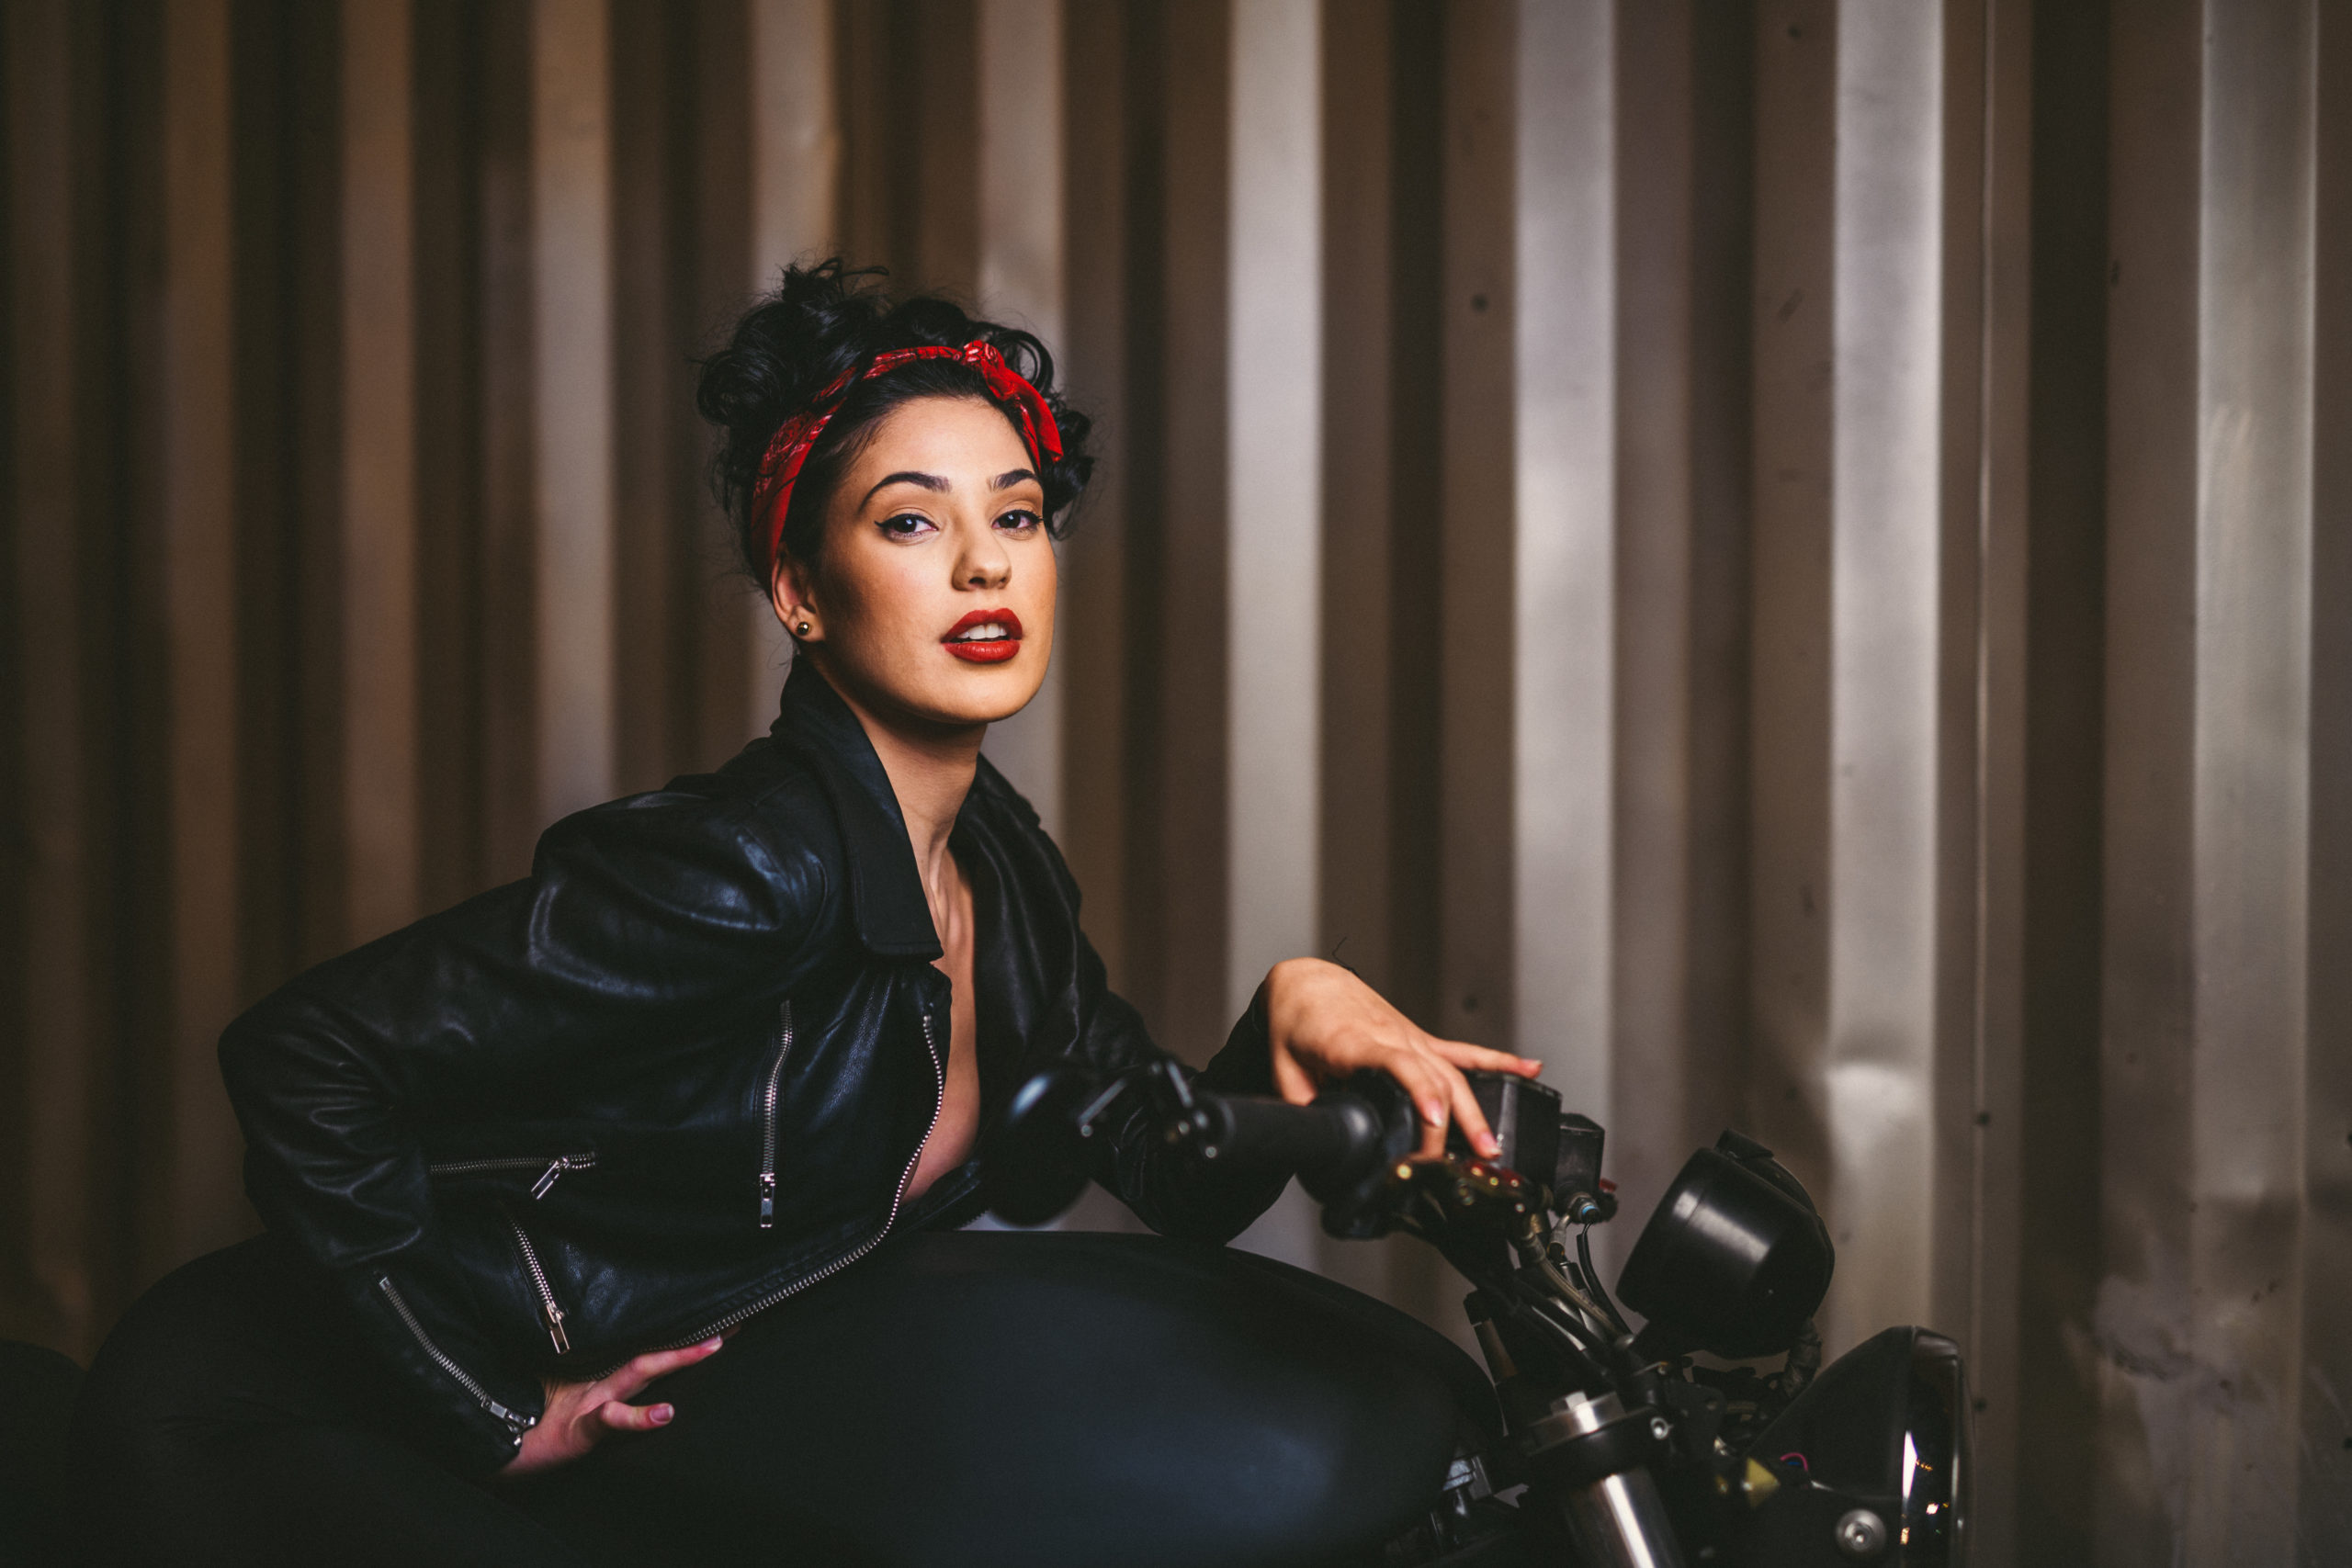 Closeup of woman with short black hair and red lipstick wearing a black leather jacket and red bandana posing for the camera sitting on a motorcycle